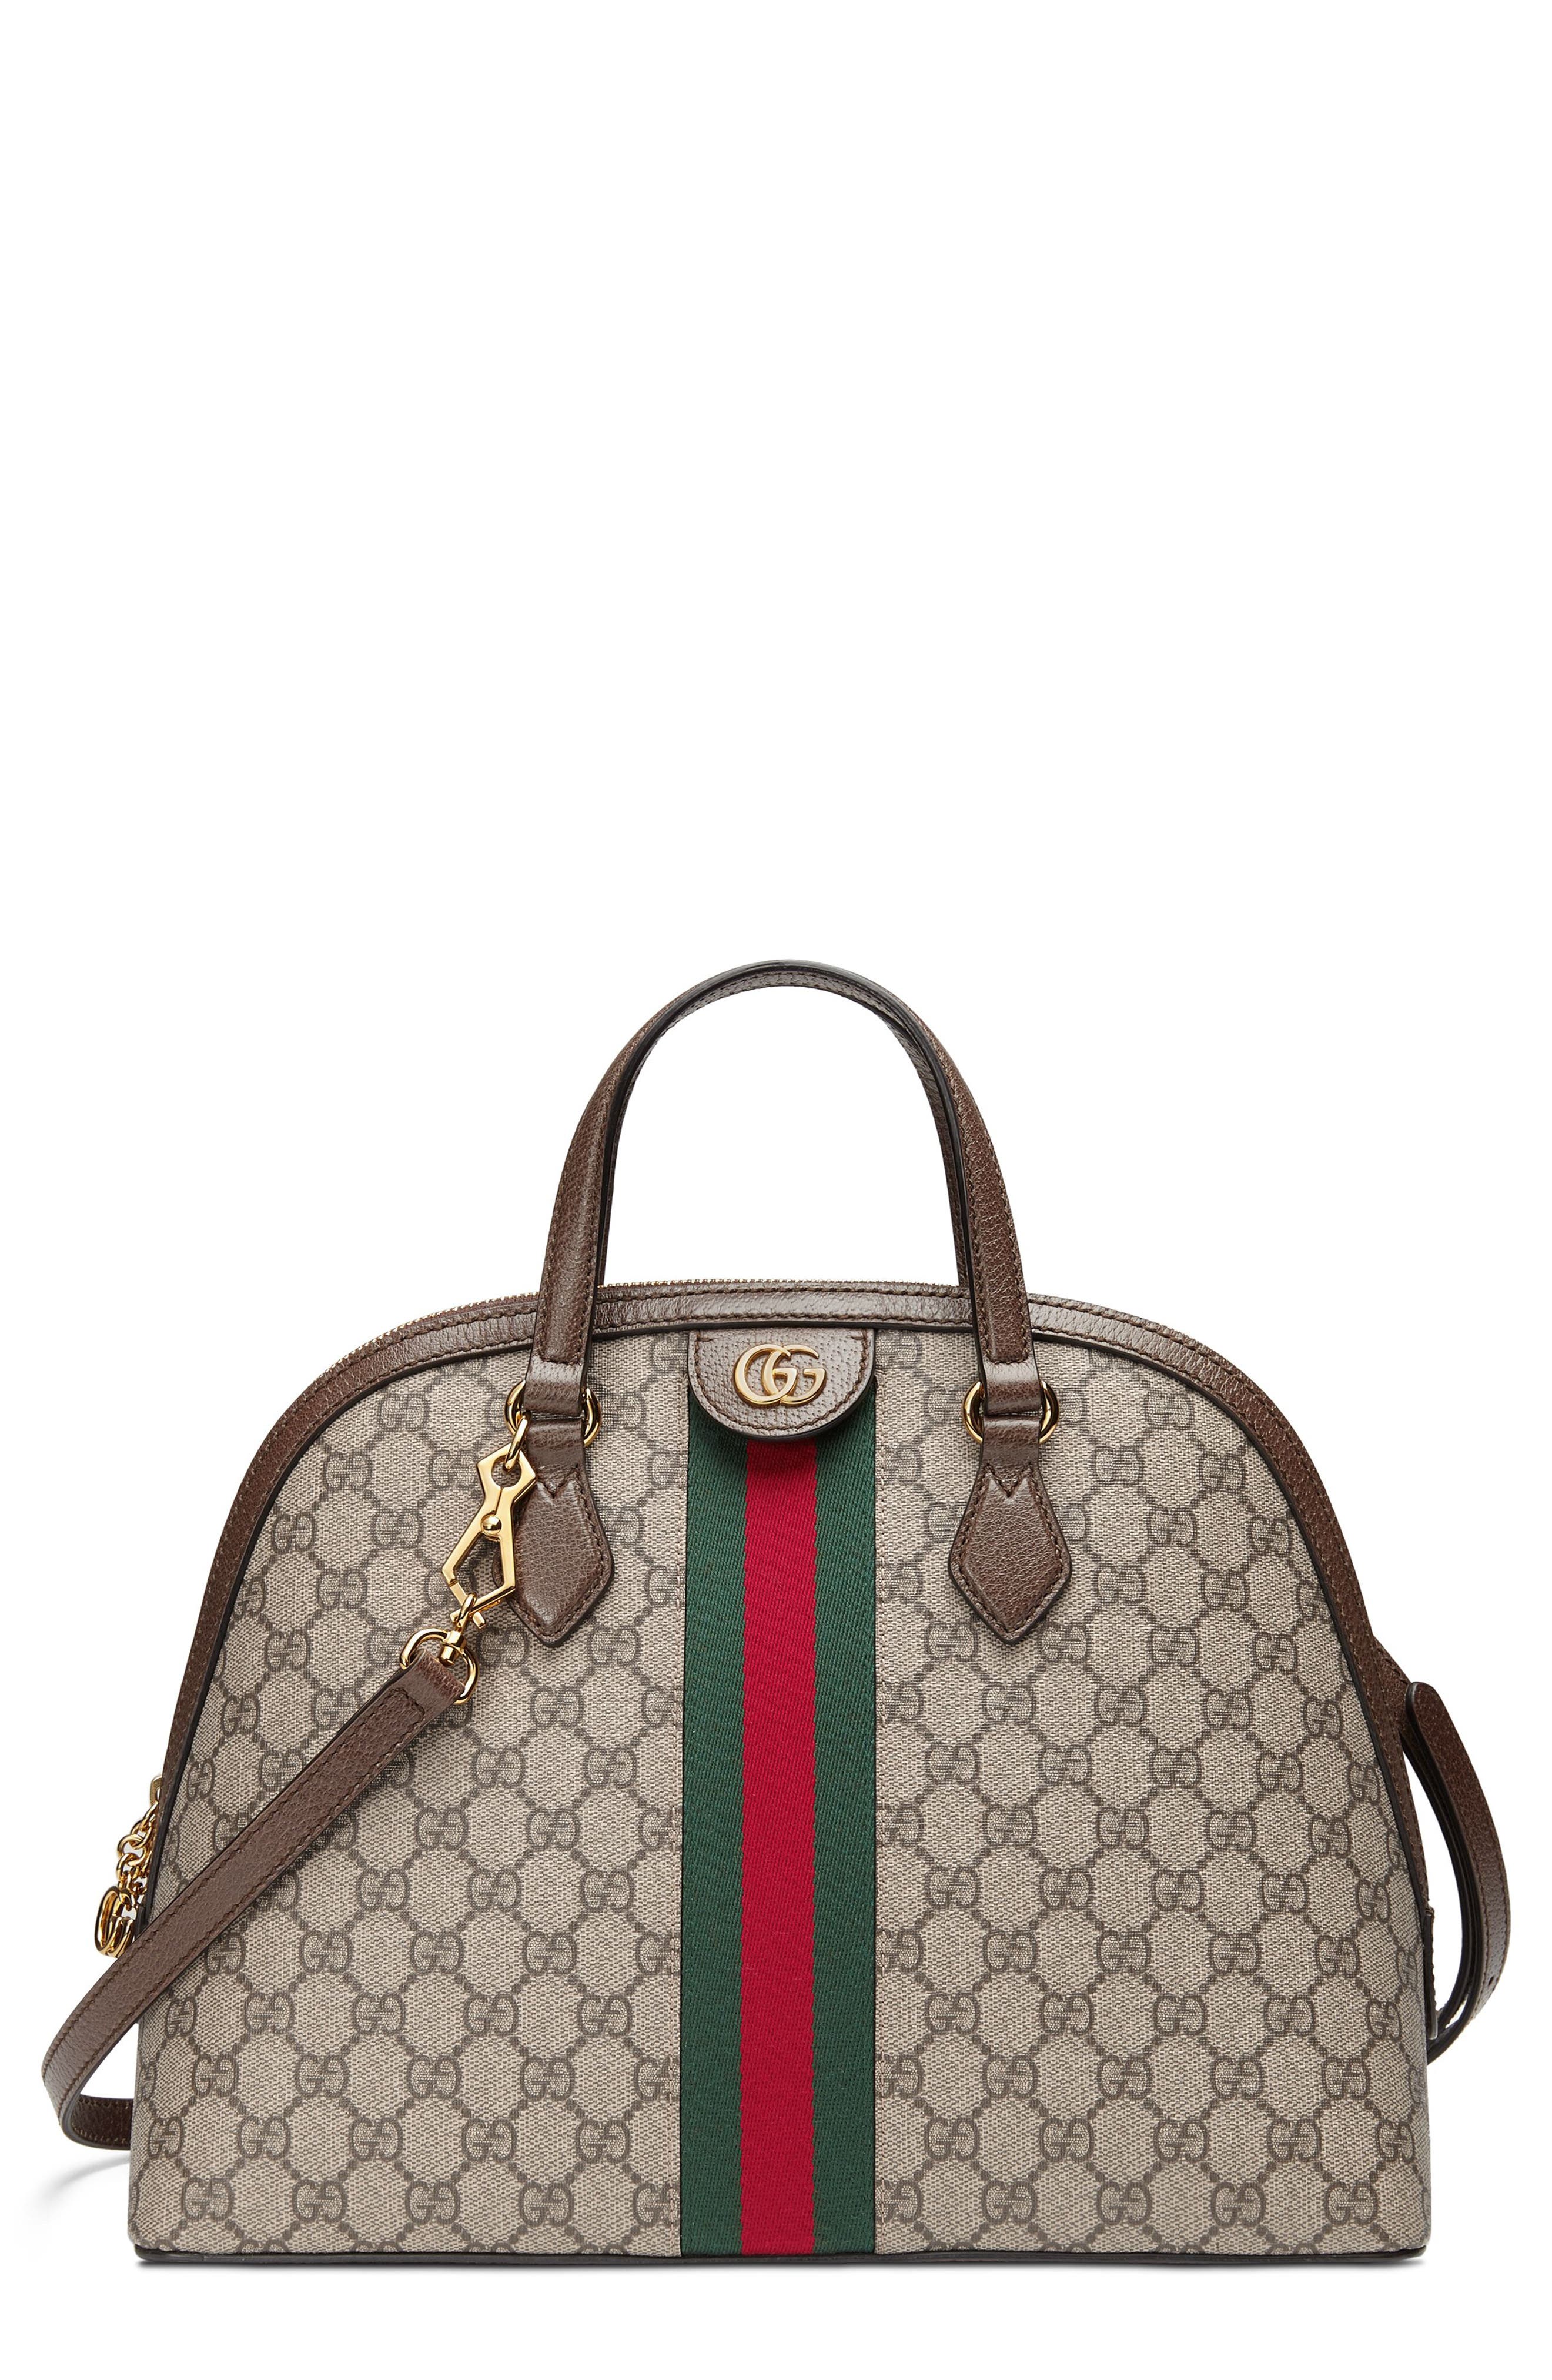 Gucci Dome Satchel | Nordstrom